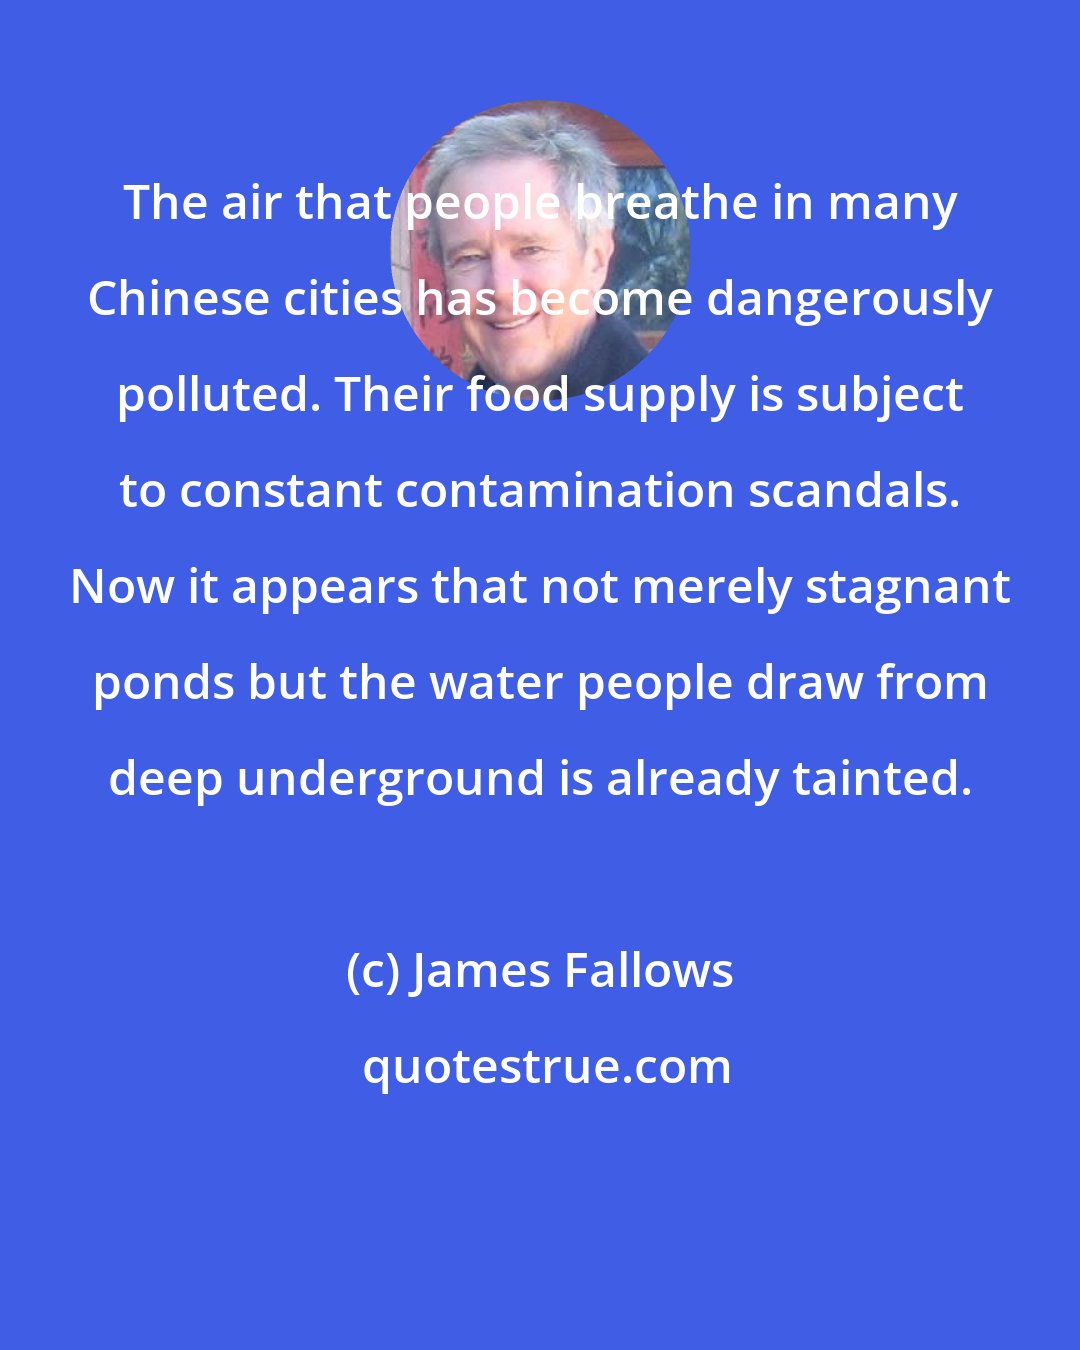 James Fallows: The air that people breathe in many Chinese cities has become dangerously polluted. Their food supply is subject to constant contamination scandals. Now it appears that not merely stagnant ponds but the water people draw from deep underground is already tainted.